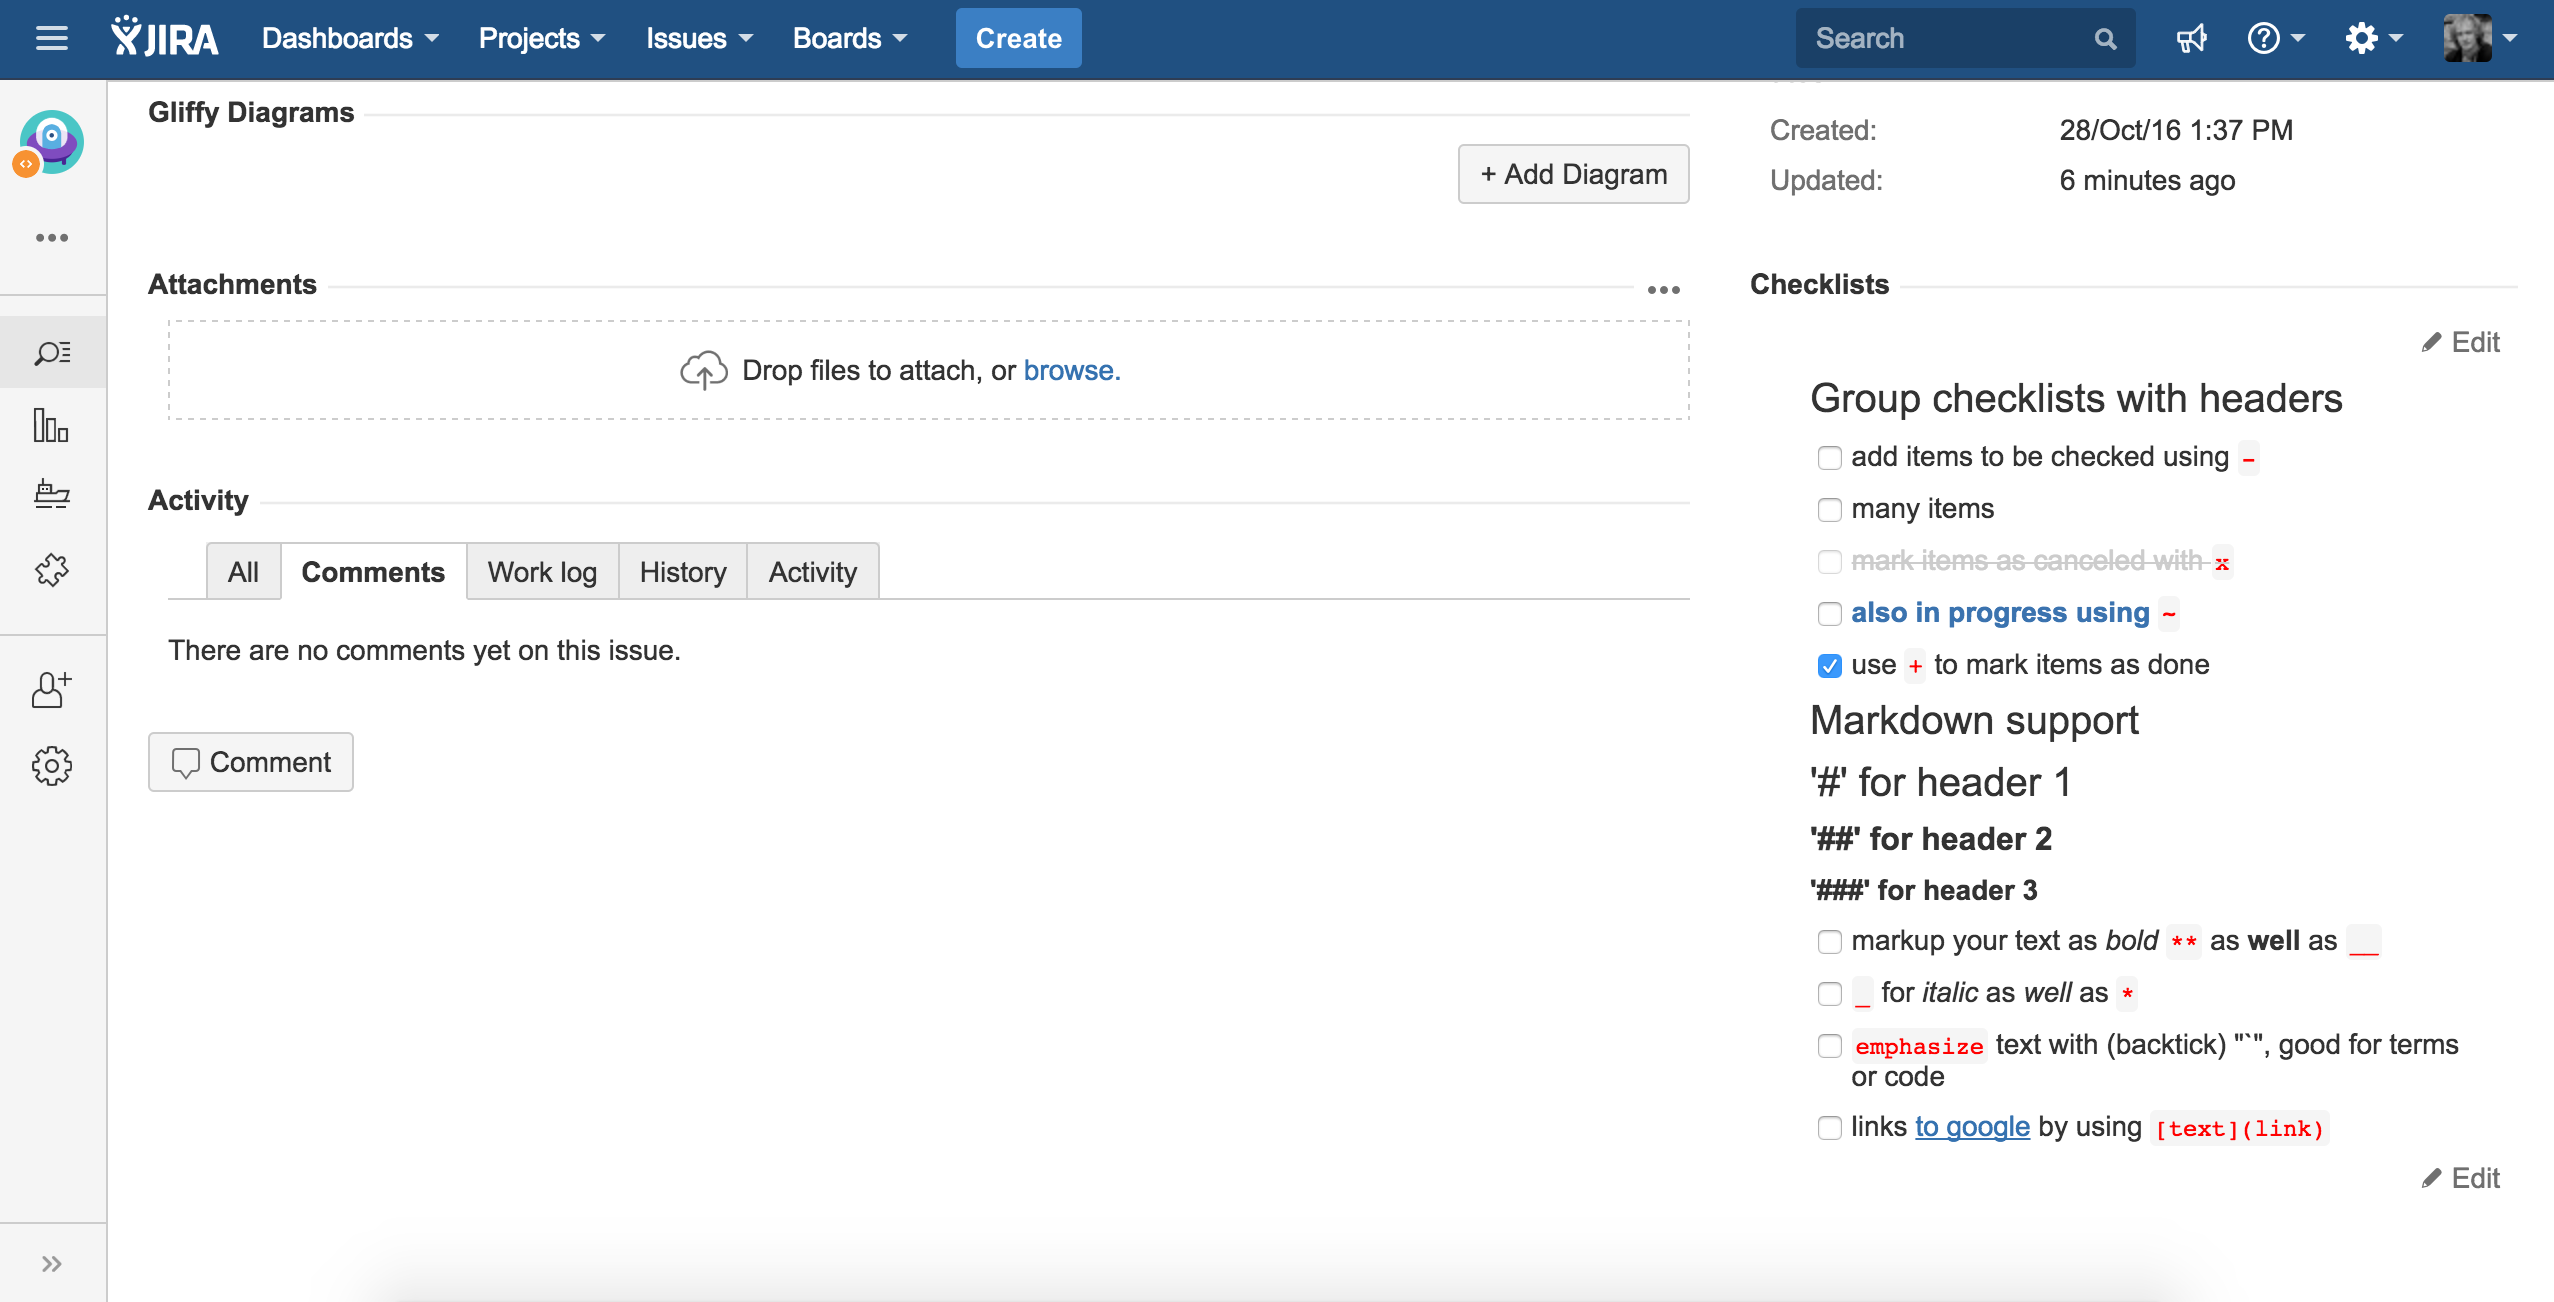 check-2-group-checklist-with-headers-jira-2016-12-07-17-24-29